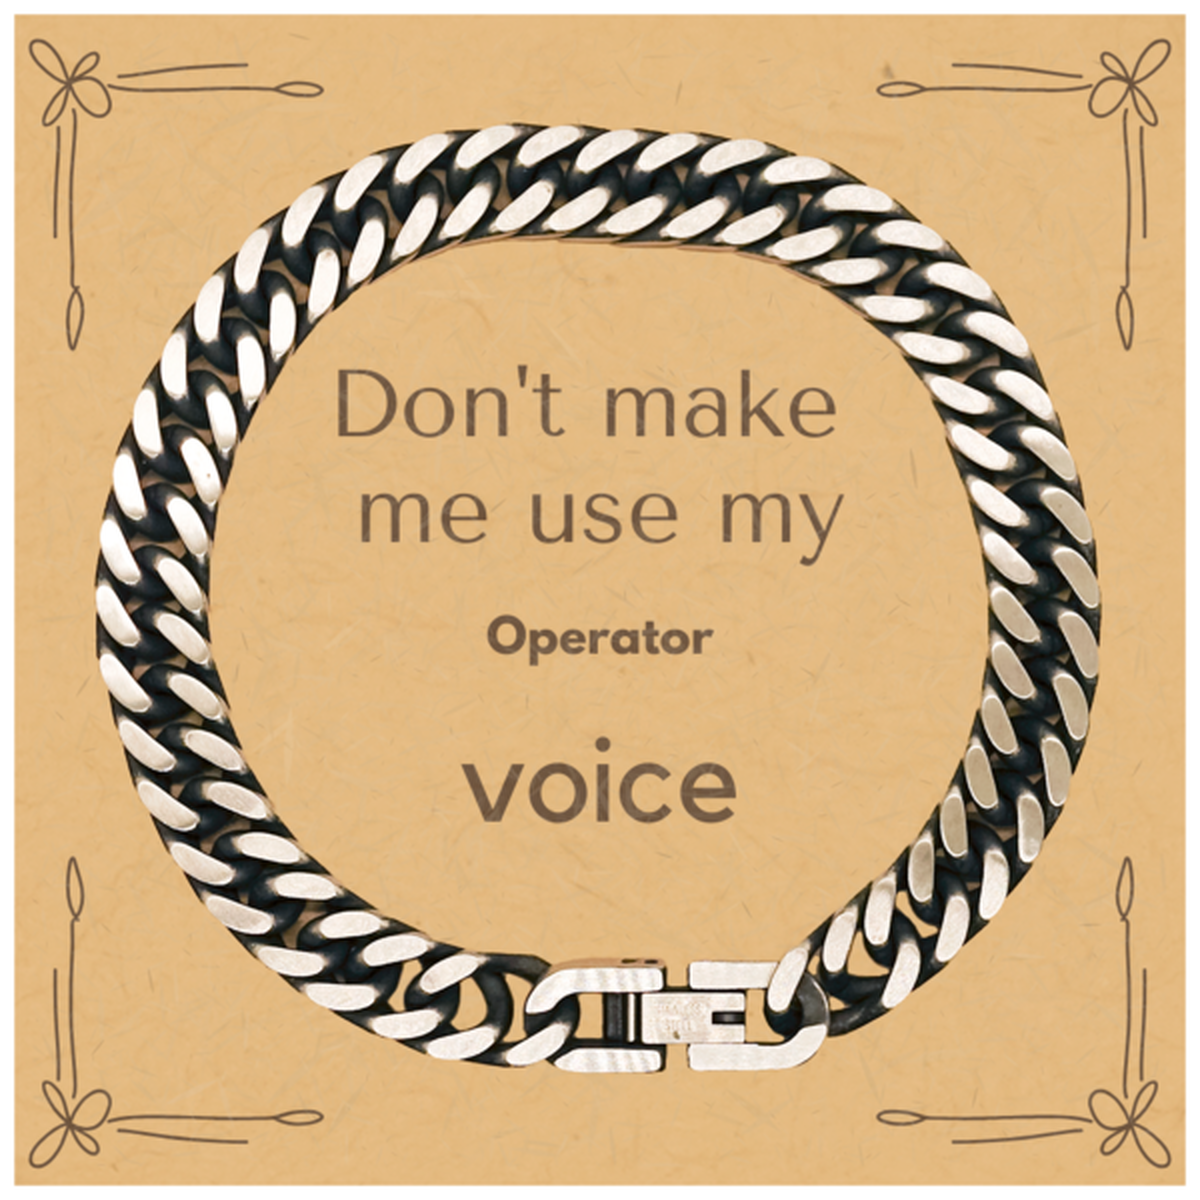 Don't make me use my Operator voice, Sarcasm Operator Card Gifts, Christmas Operator Cuban Link Chain Bracelet Birthday Unique Gifts For Operator Coworkers, Men, Women, Colleague, Friends